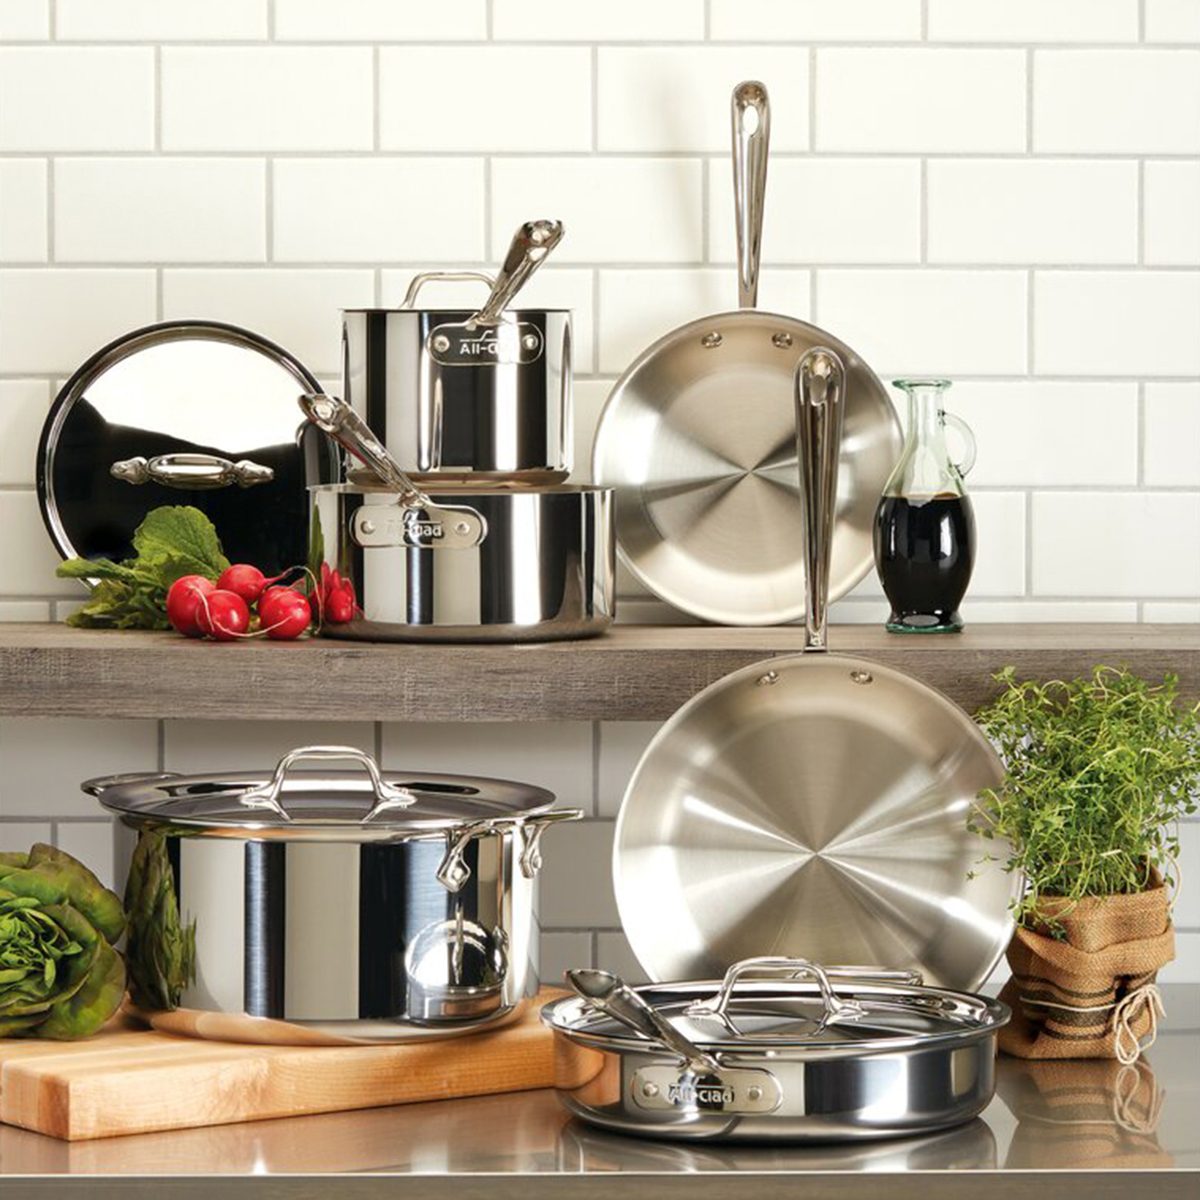 https://www.tasteofhome.com/wp-content/uploads/2021/06/all-clad-d3-stainless-10-piece-stainless-steel-cookware-set.jpg?fit=700%2C700